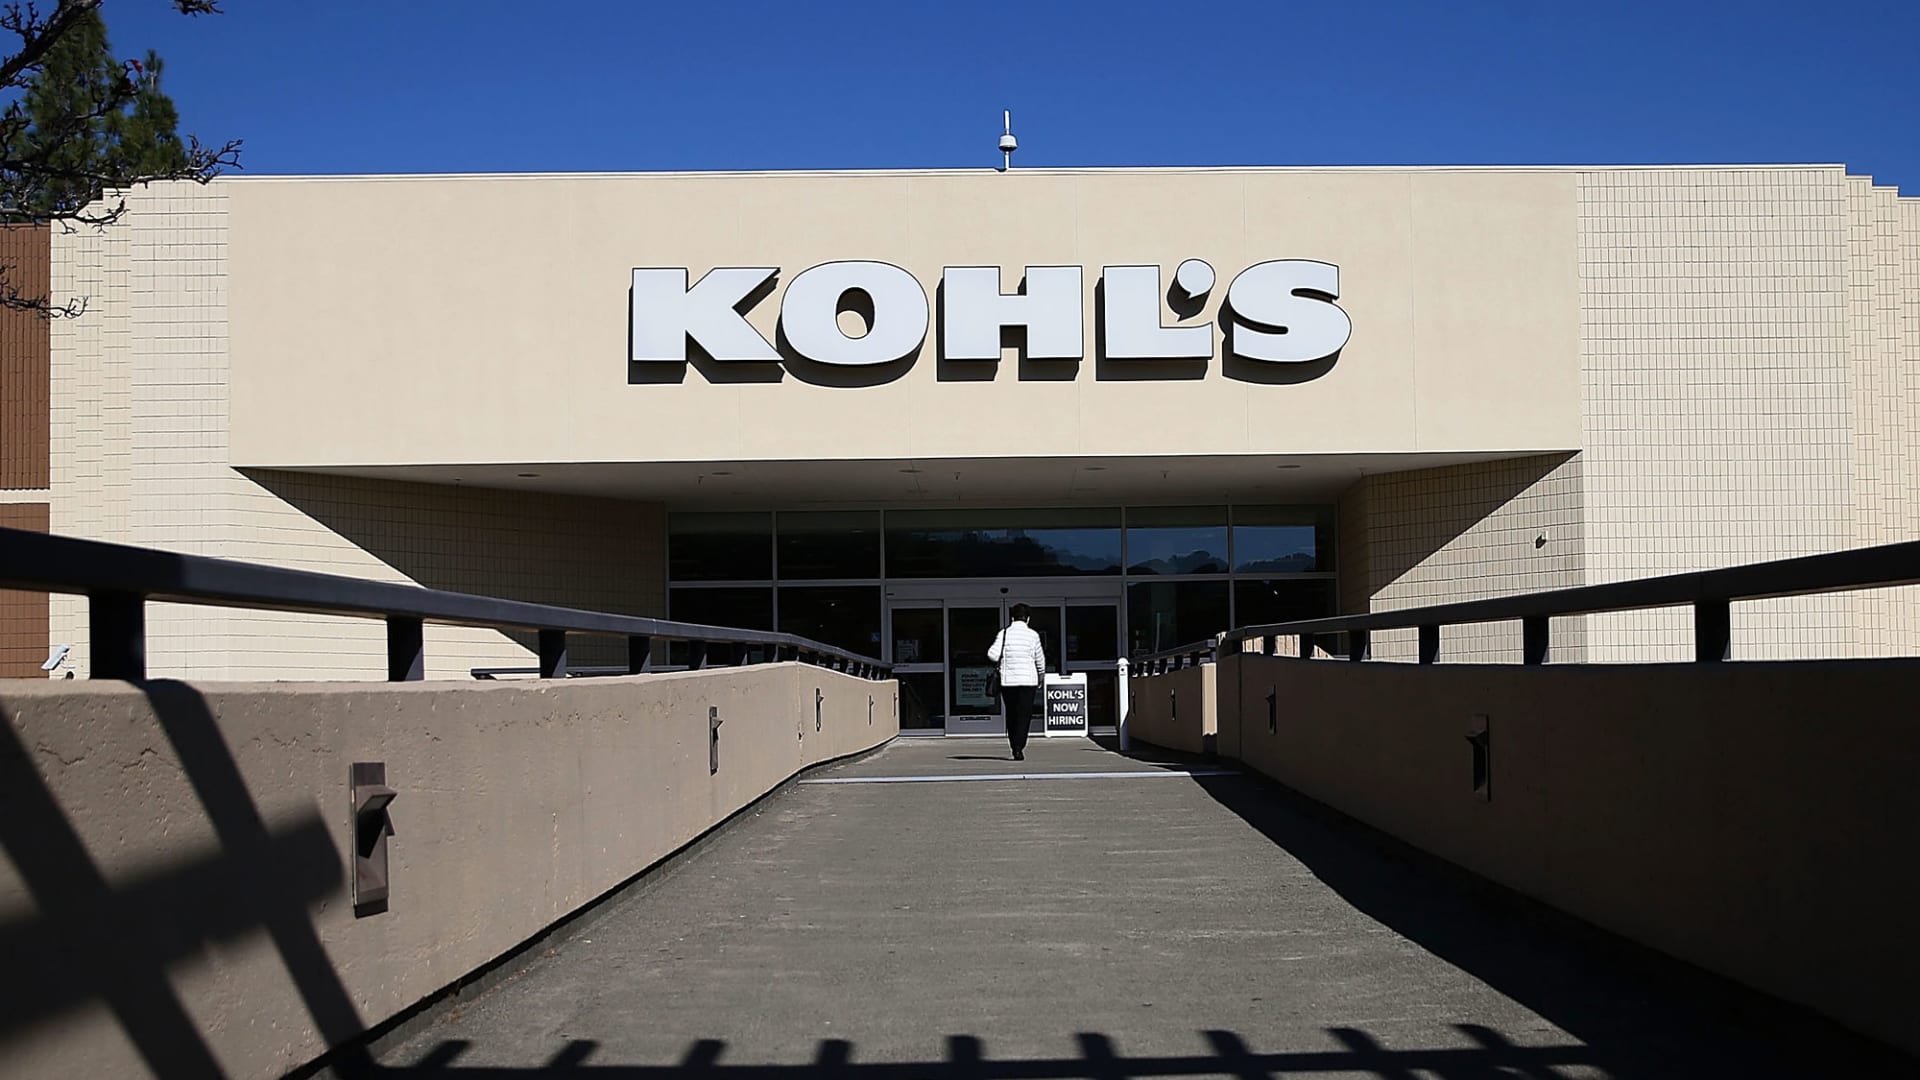 Kohl’s terminates sale talks with Vitamin Shoppe owner Franchise Group sources say – CNBC